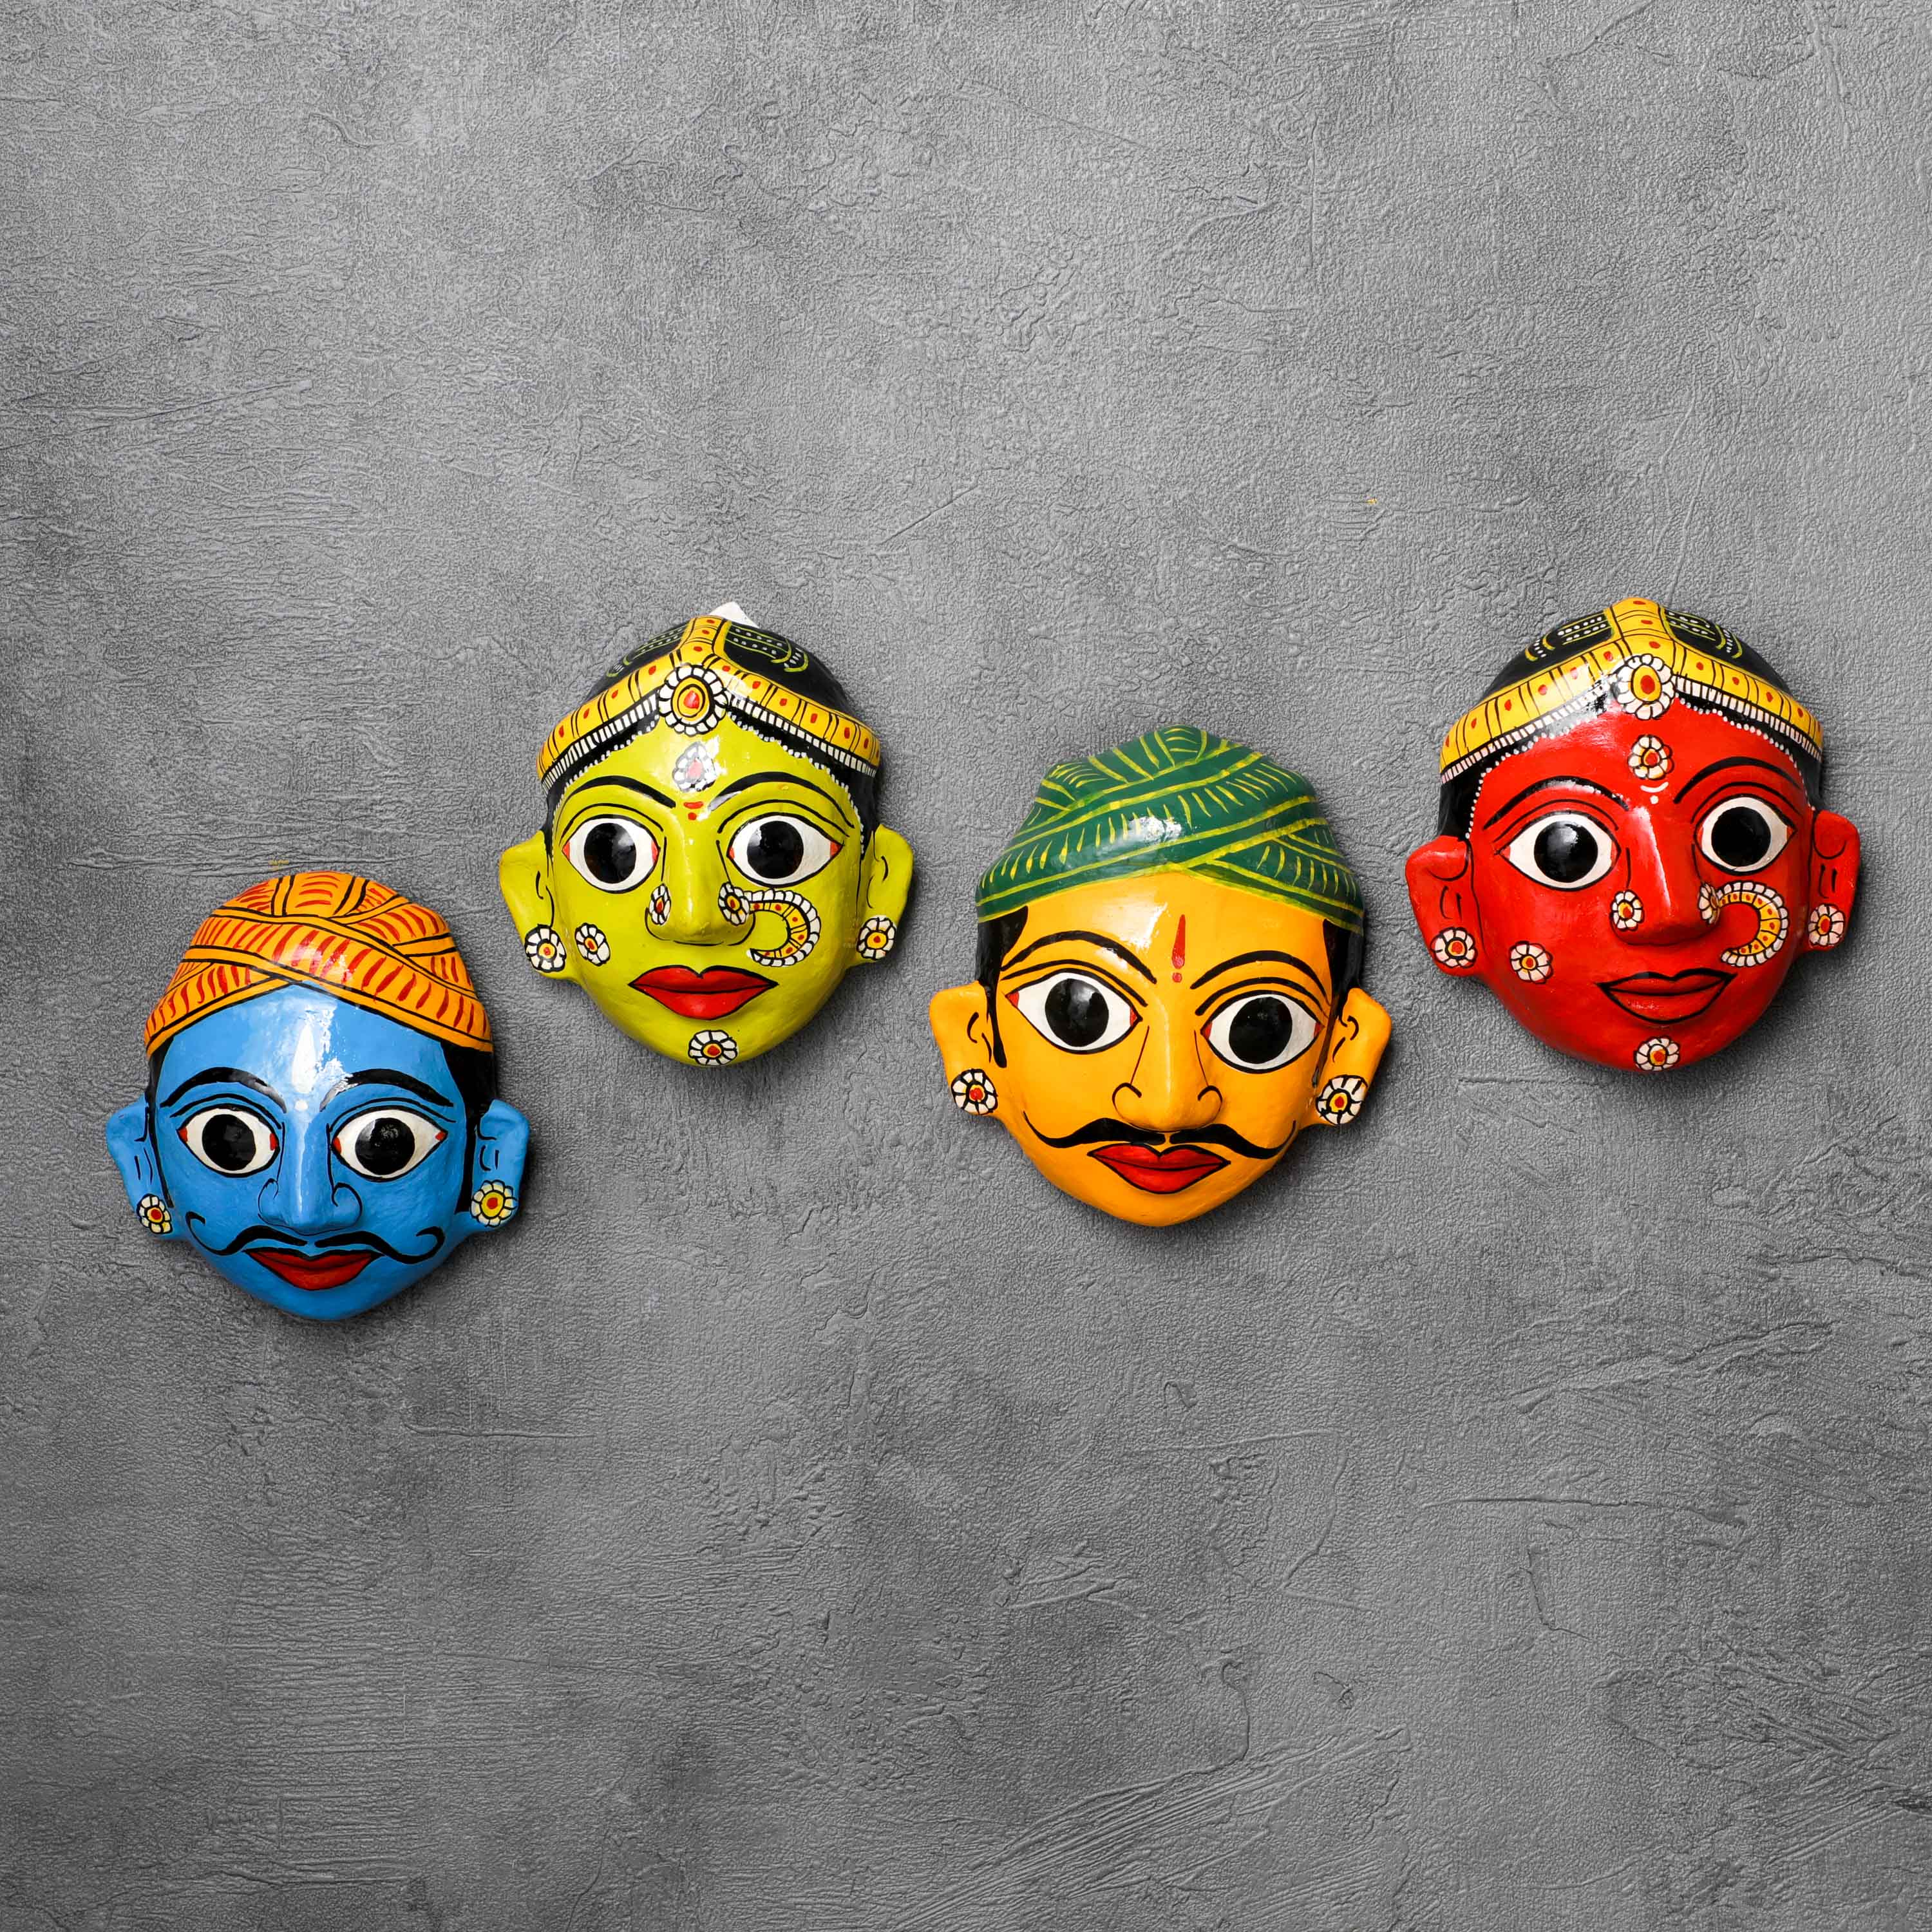 Rural Couple Cheriyal Mask for Home/Office Décor online in the USA